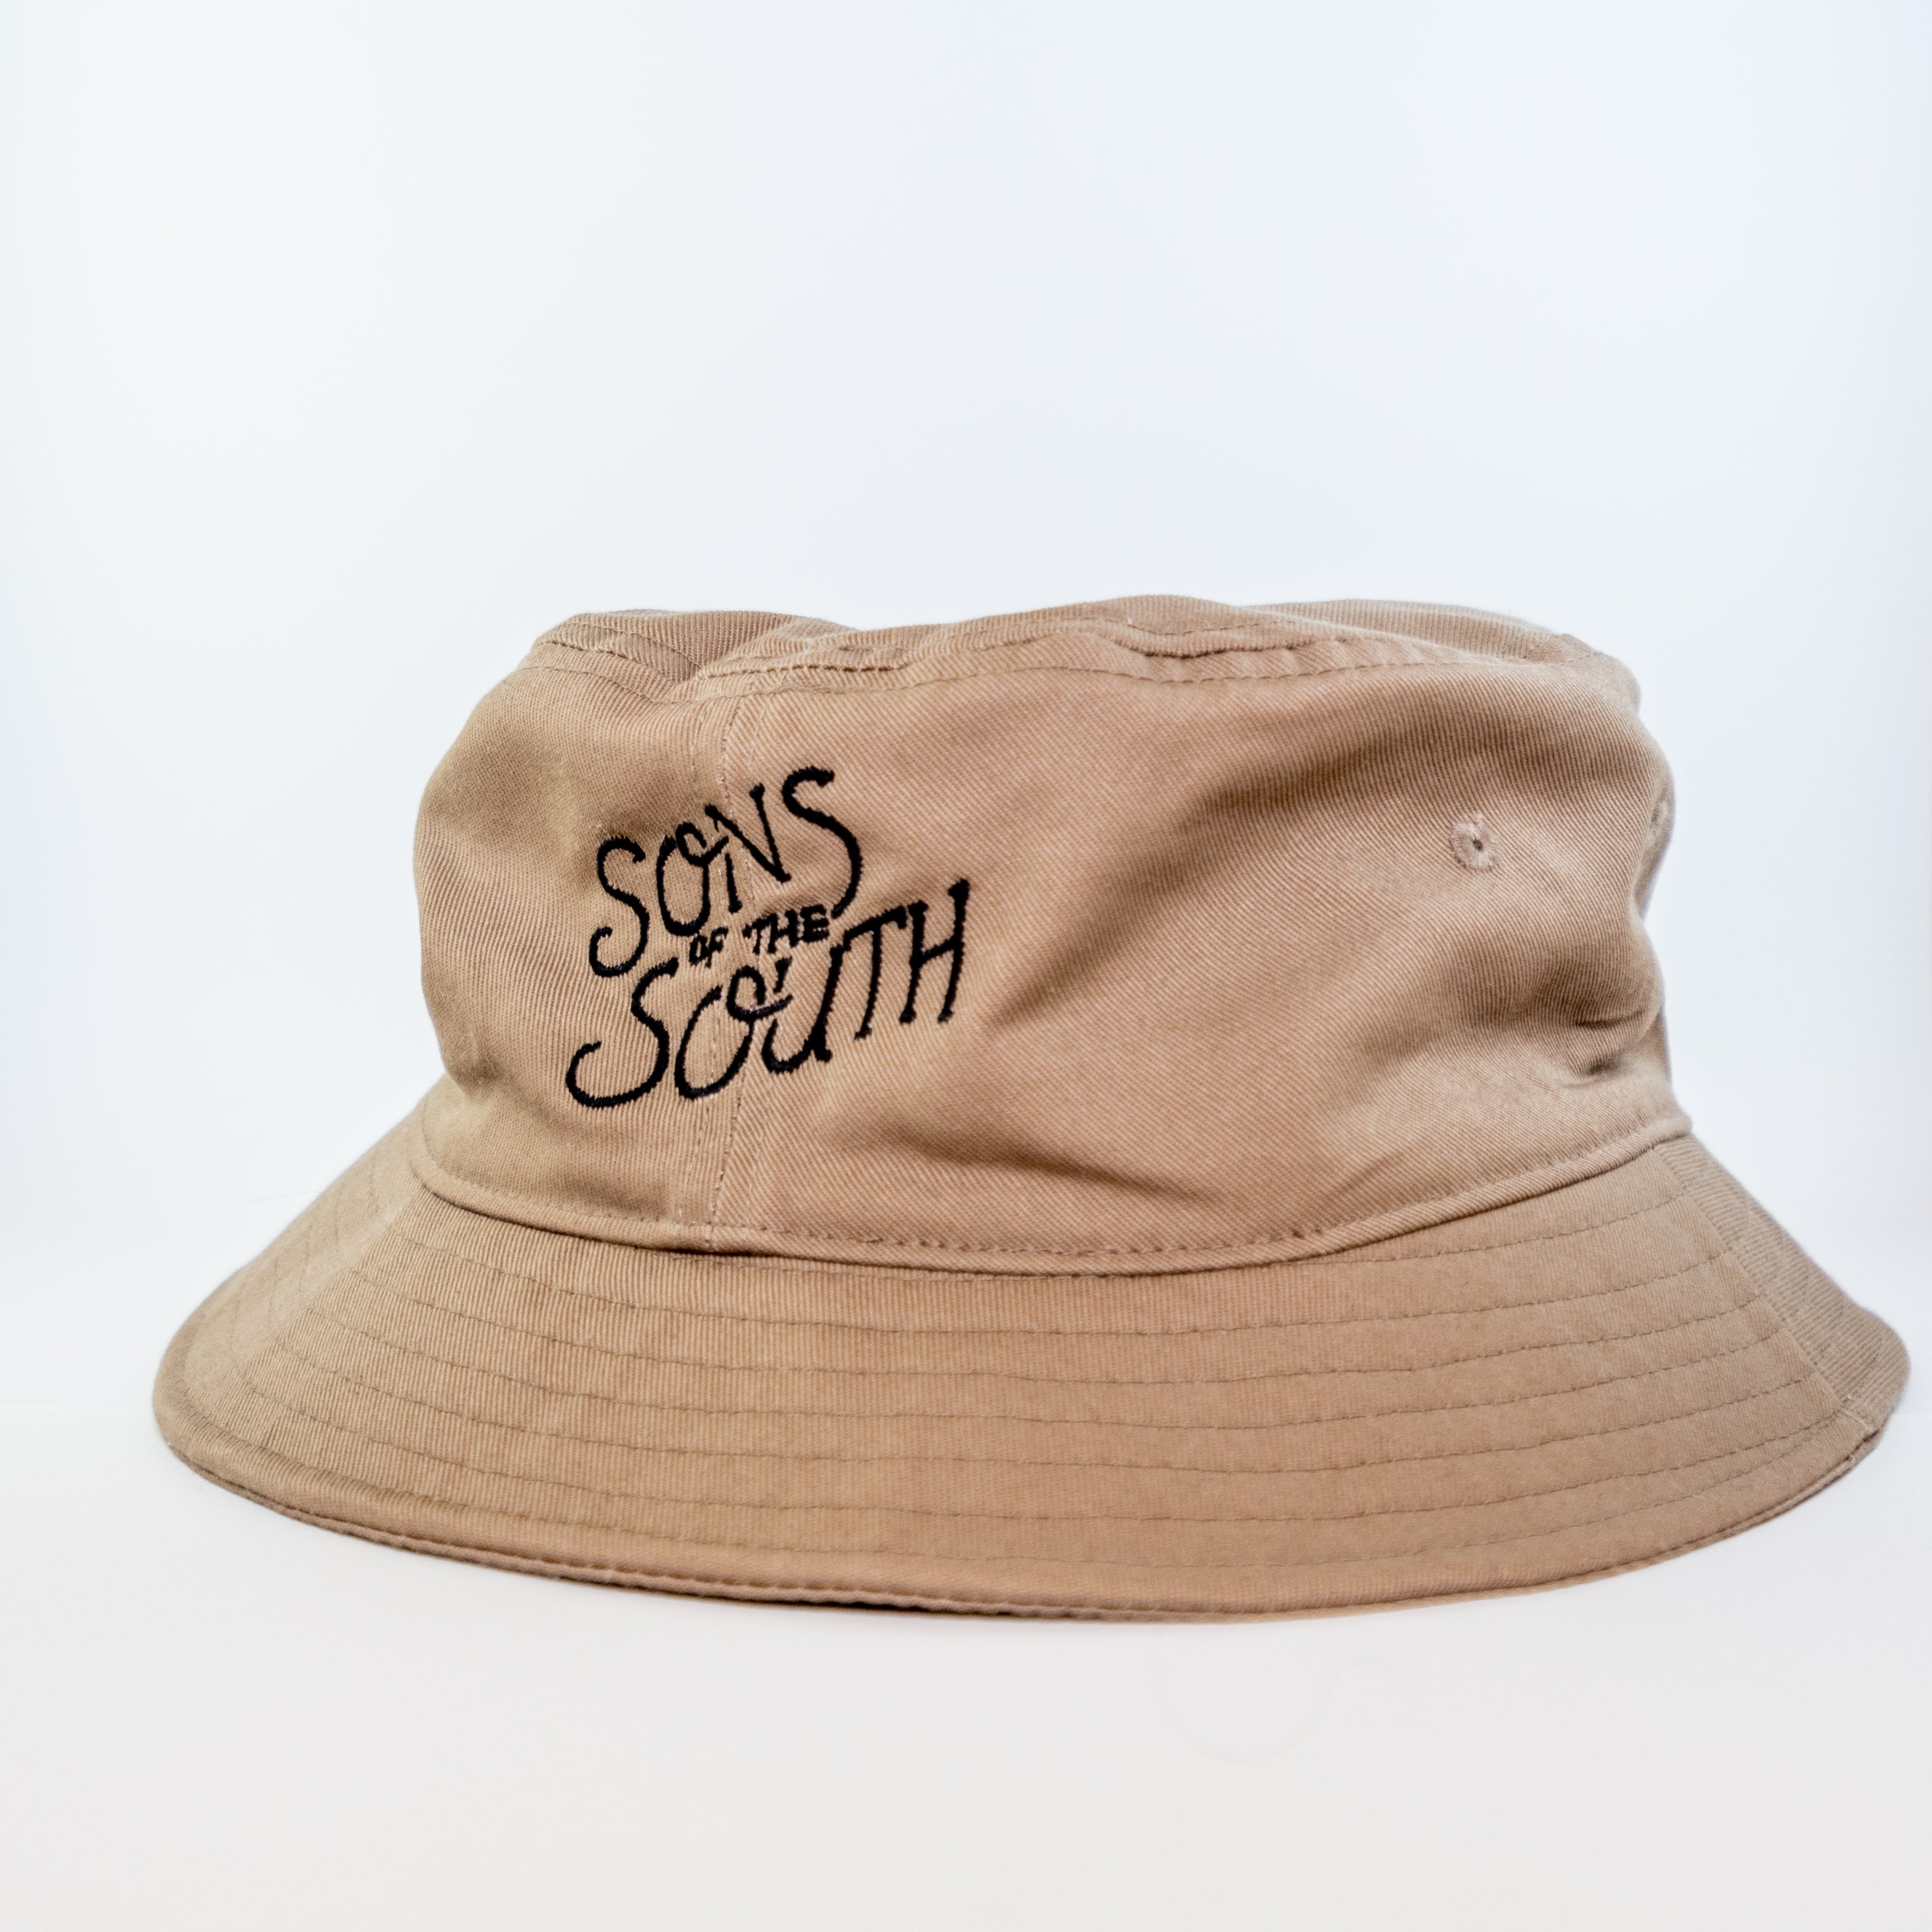 Stay Cool New Zealand made Bucket Hut Brown